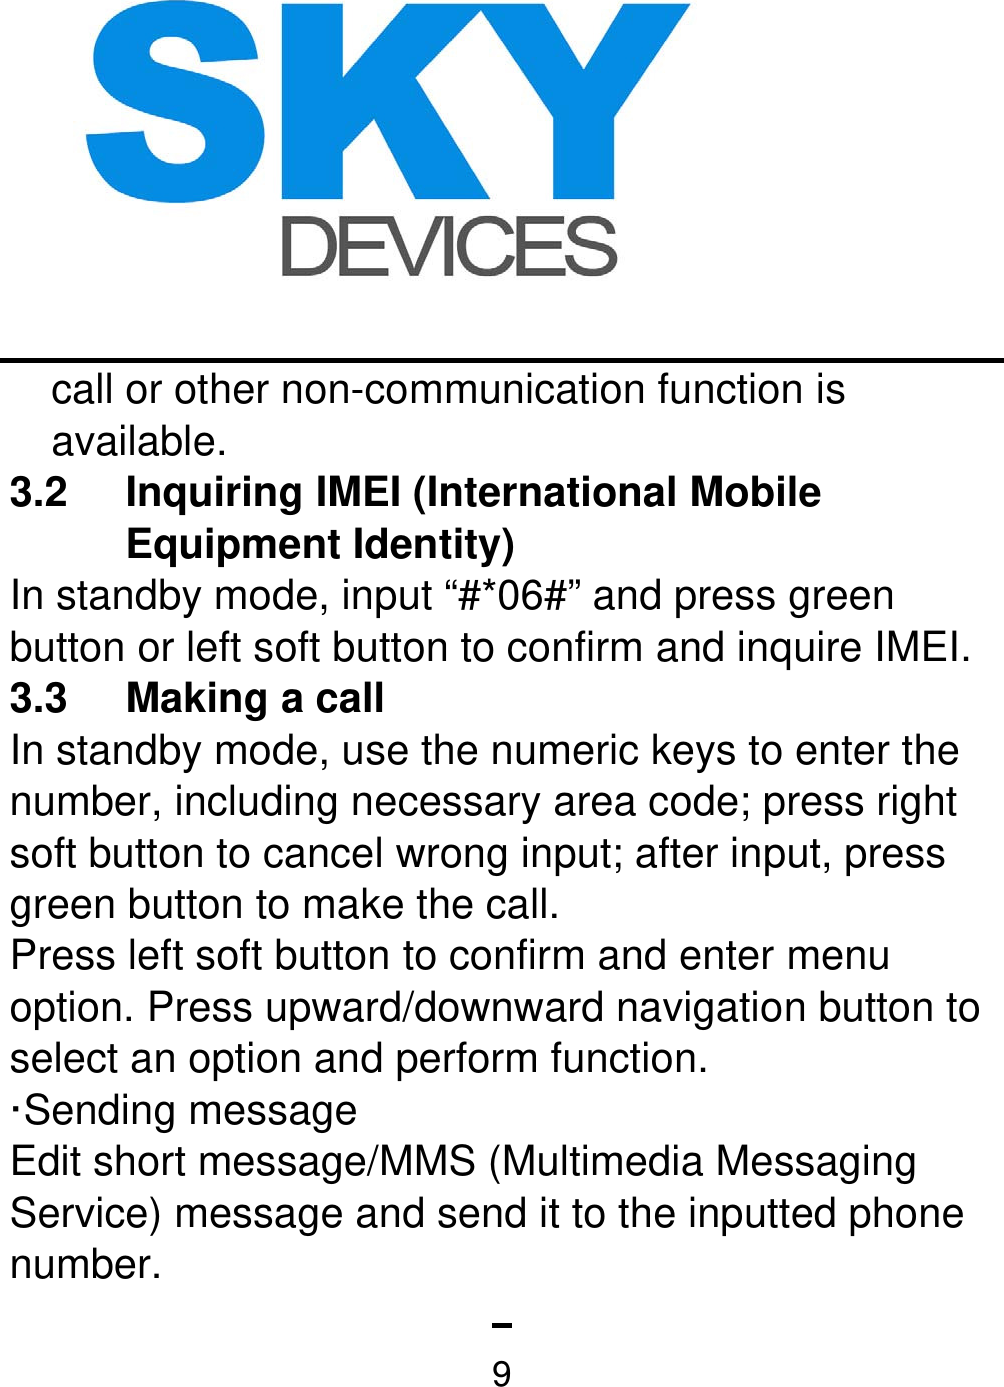   9call or other non-communication function is available. 3.2 Inquiring IMEI (International Mobile Equipment Identity)   In standby mode, input “#*06#” and press green button or left soft button to confirm and inquire IMEI. 3.3 Making a call  In standby mode, use the numeric keys to enter the number, including necessary area code; press right soft button to cancel wrong input; after input, press green button to make the call. Press left soft button to confirm and enter menu option. Press upward/downward navigation button to select an option and perform function.   ·Sending message   Edit short message/MMS (Multimedia Messaging Service) message and send it to the inputted phone number. 